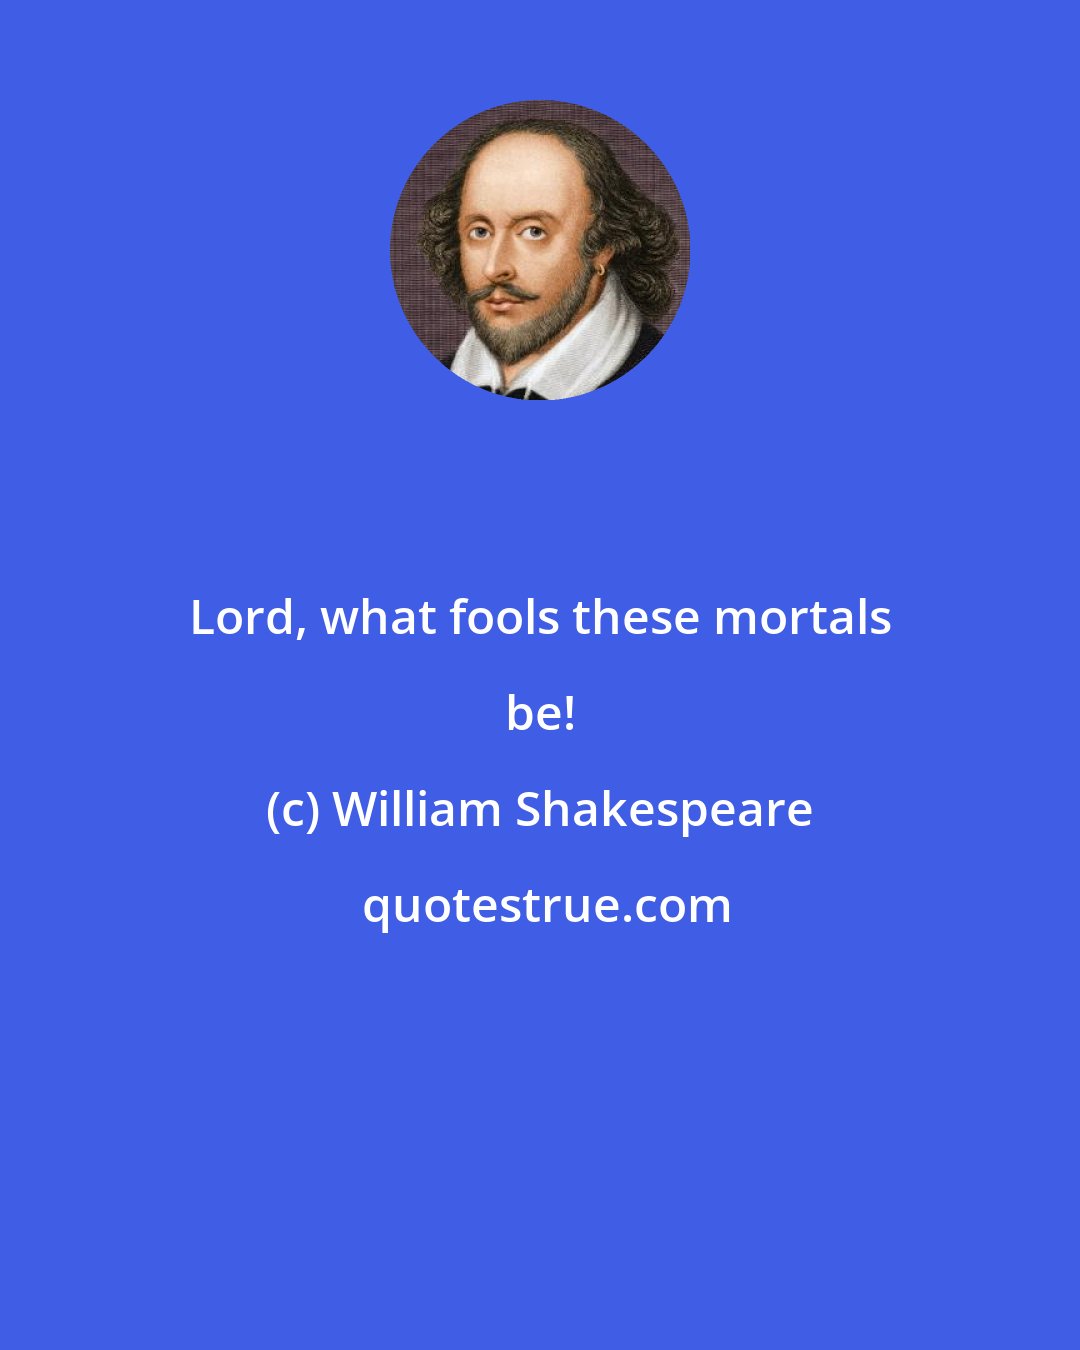 William Shakespeare: Lord, what fools these mortals be!